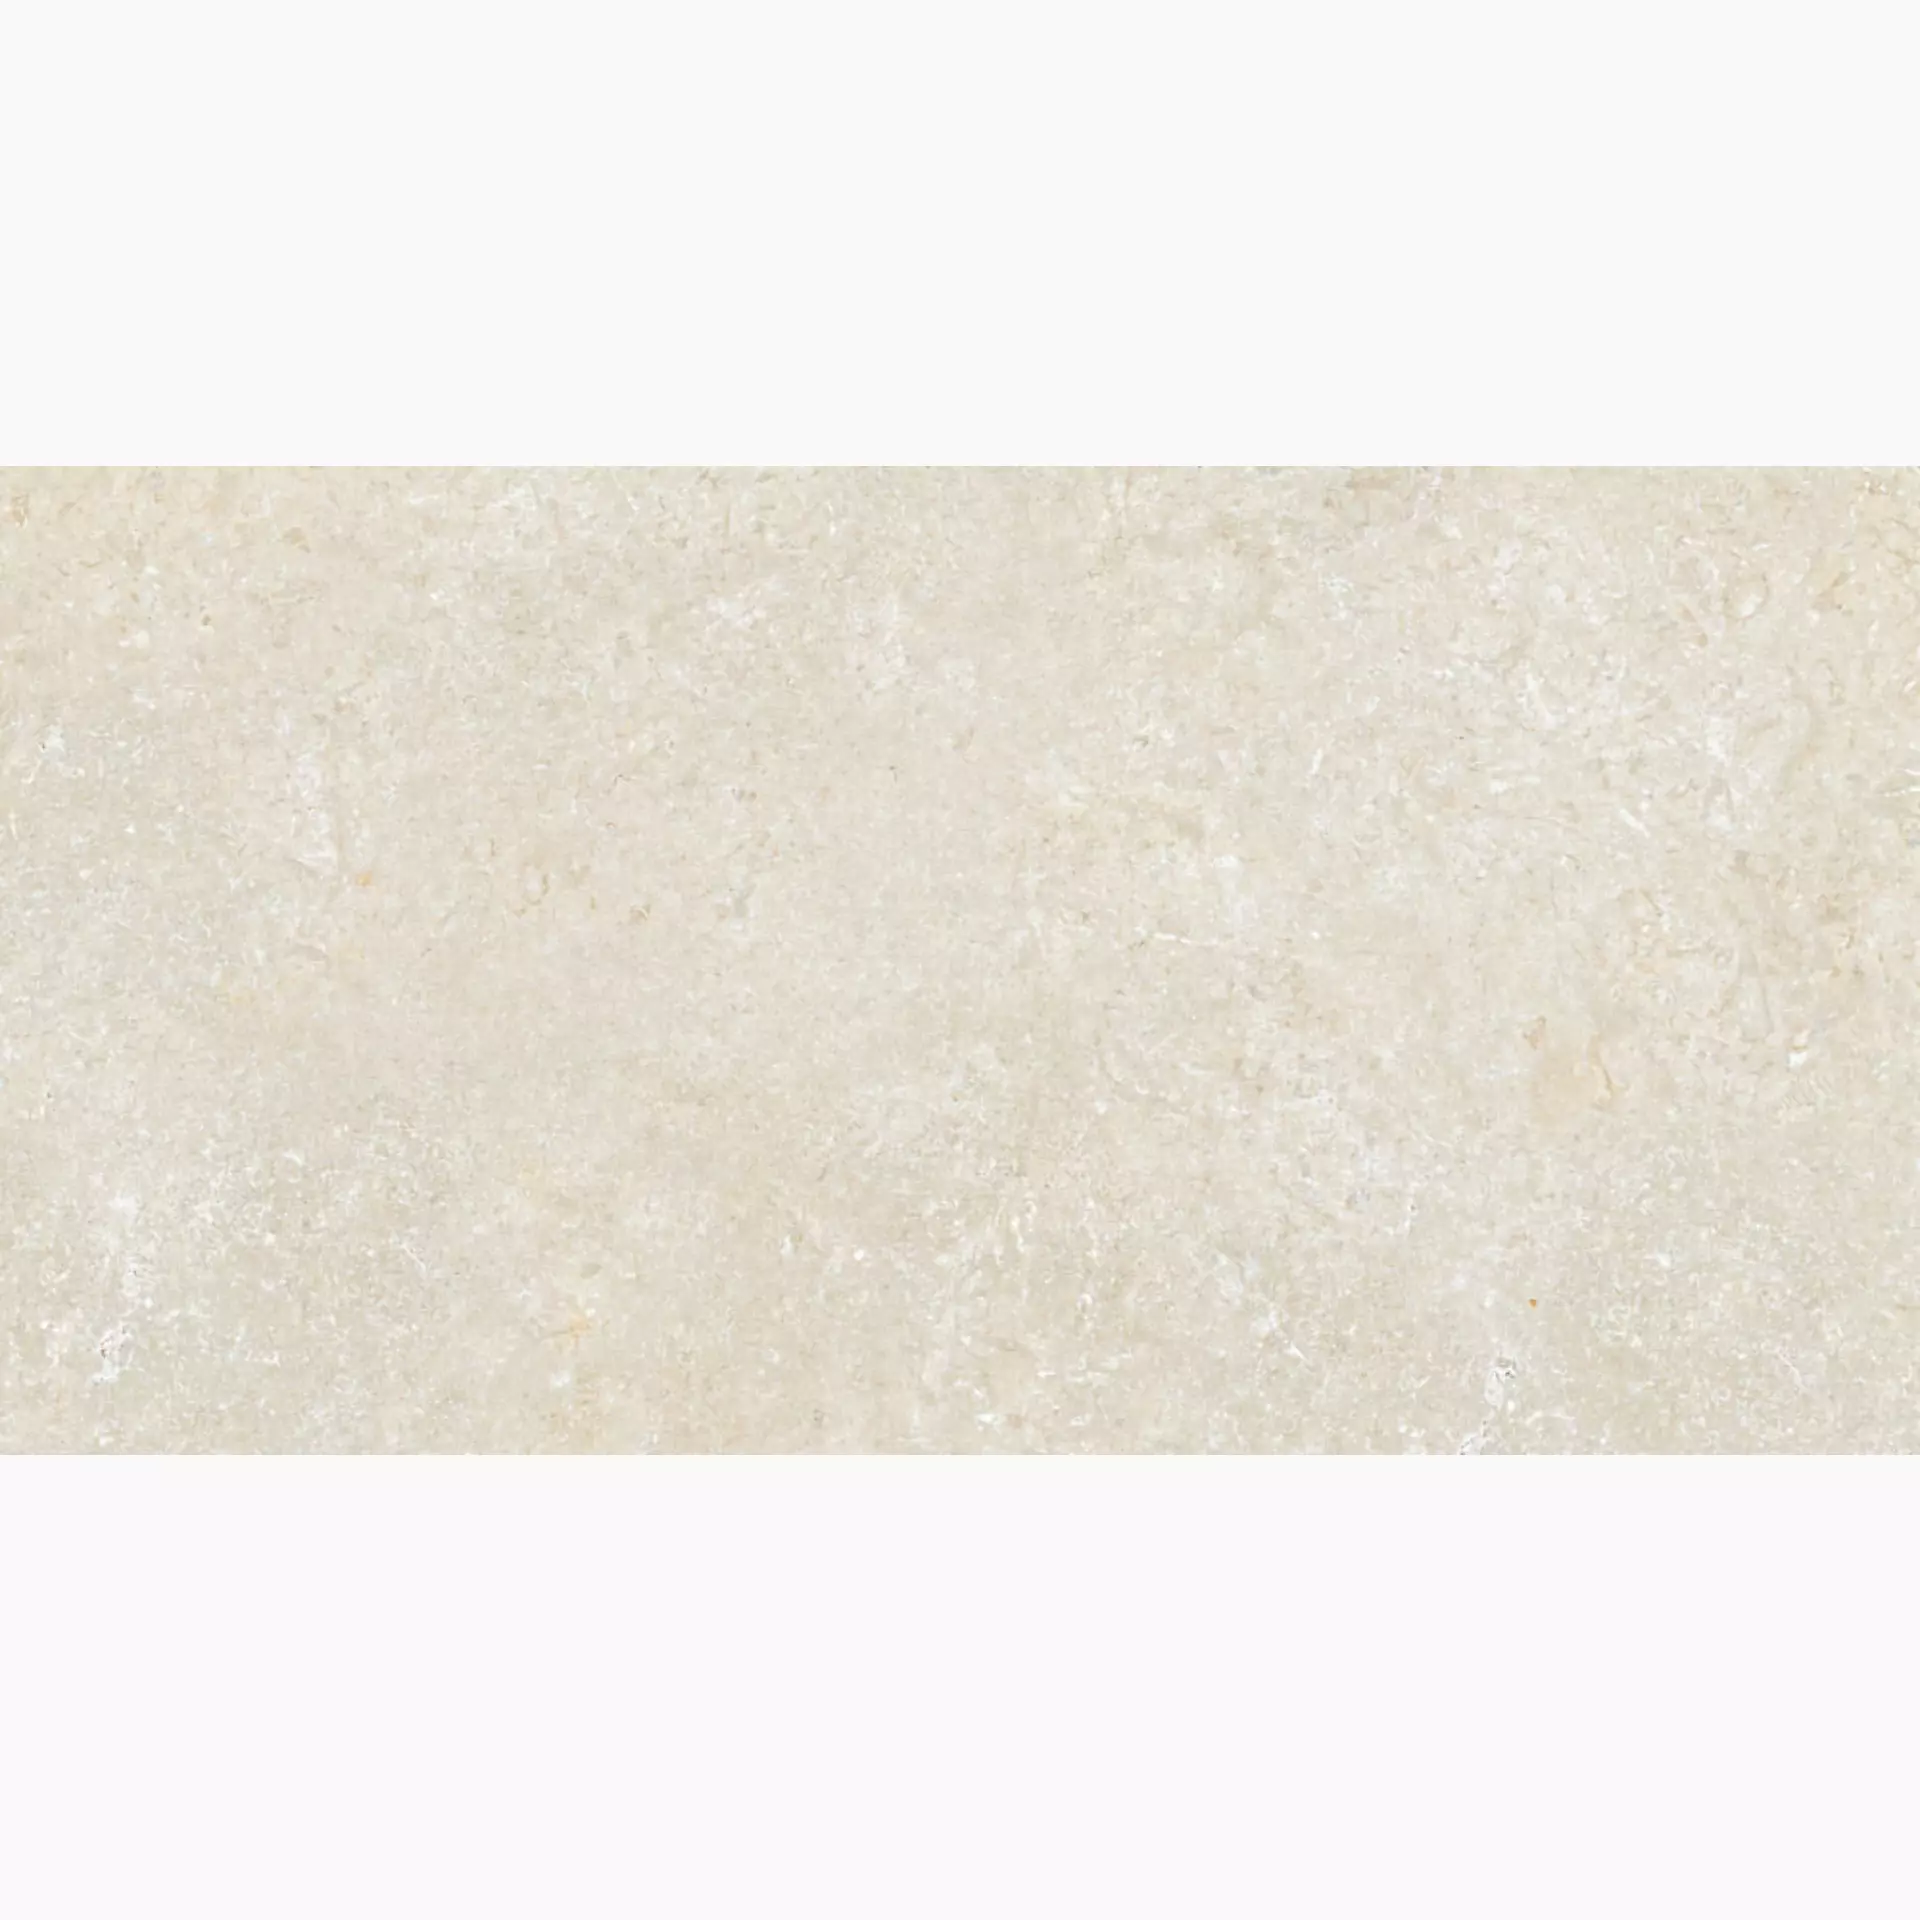 Cottodeste Secret Stone Mystery White Honed Protect EGXSSX0 60x120cm rectified 14mm